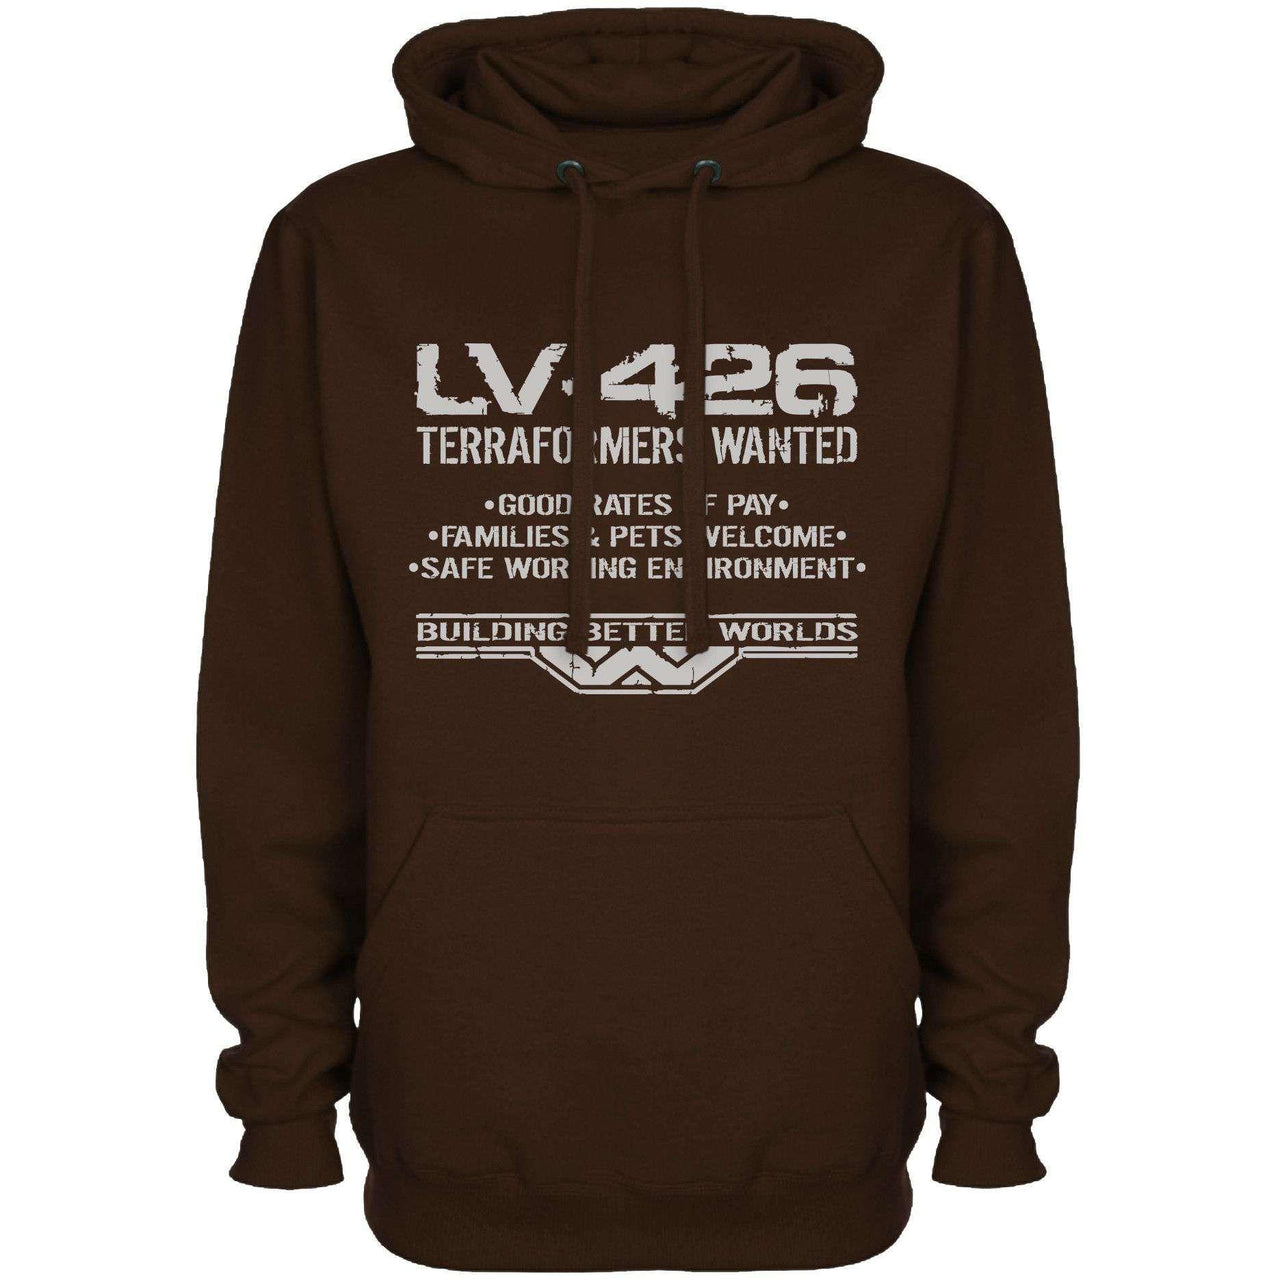 LV-426 Terraformers Wanted Graphic Hoodie 8Ball